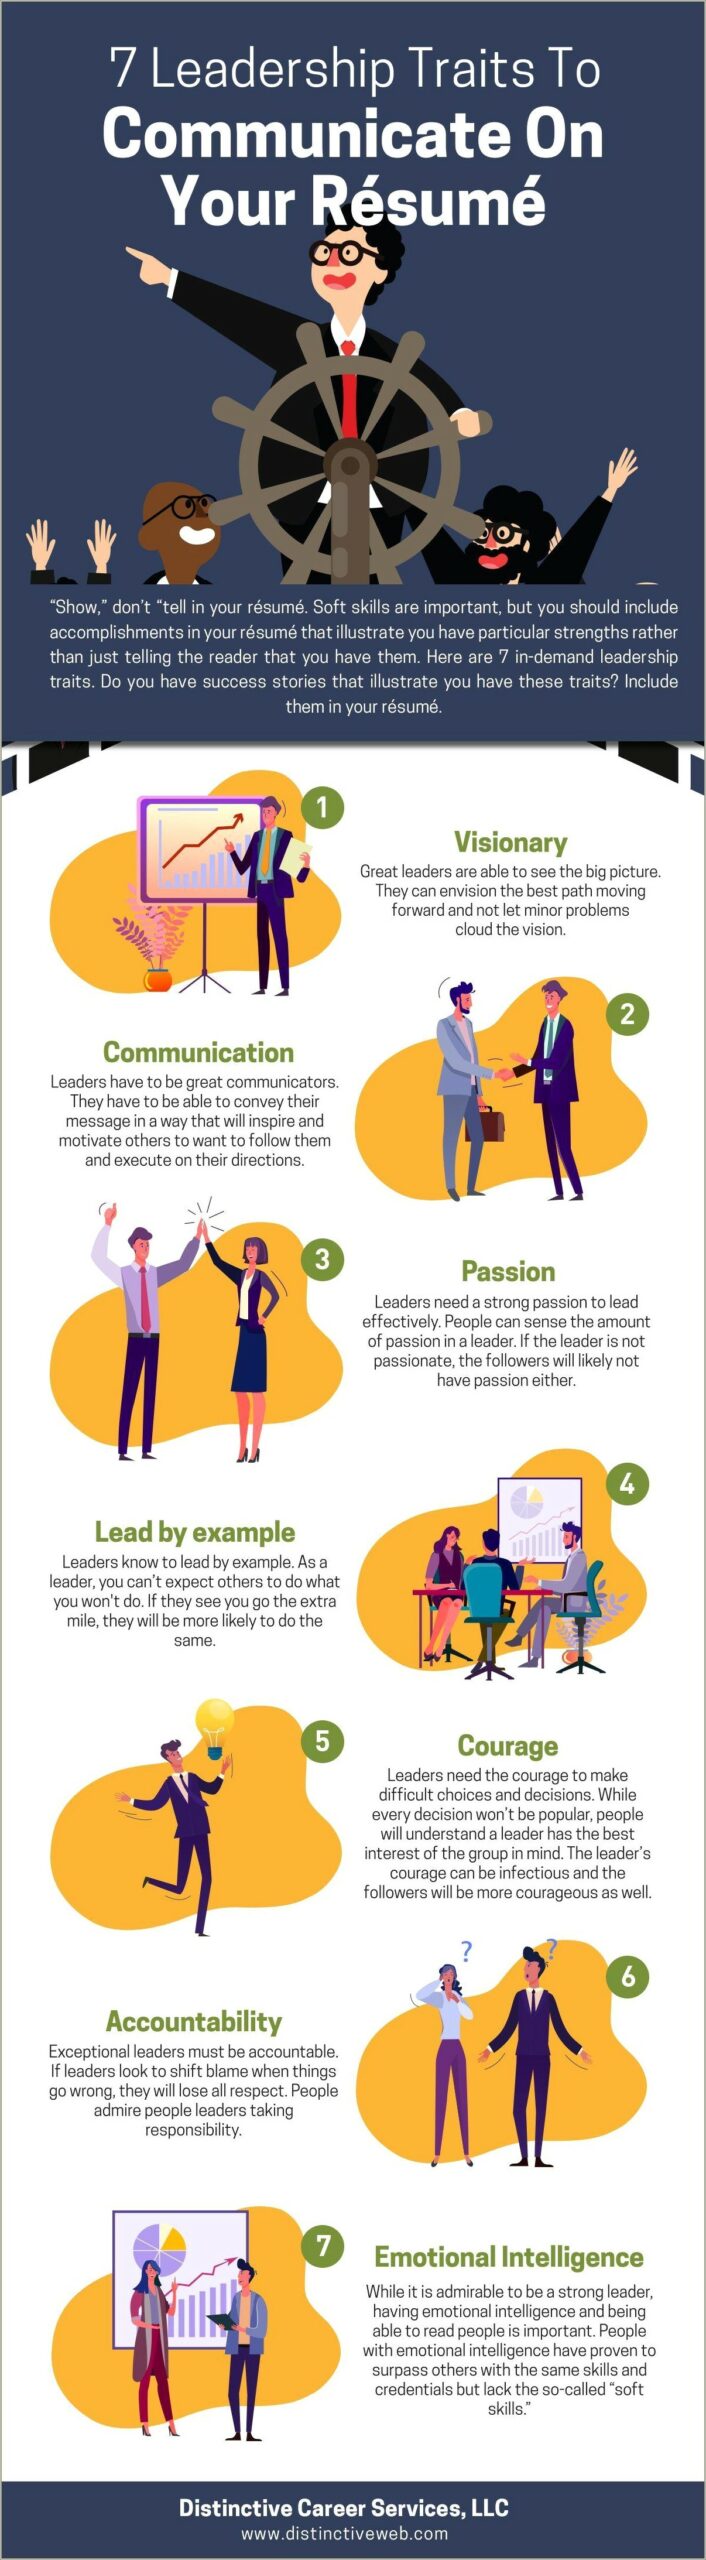 Best Way To Convey Communication Skillls On Resume